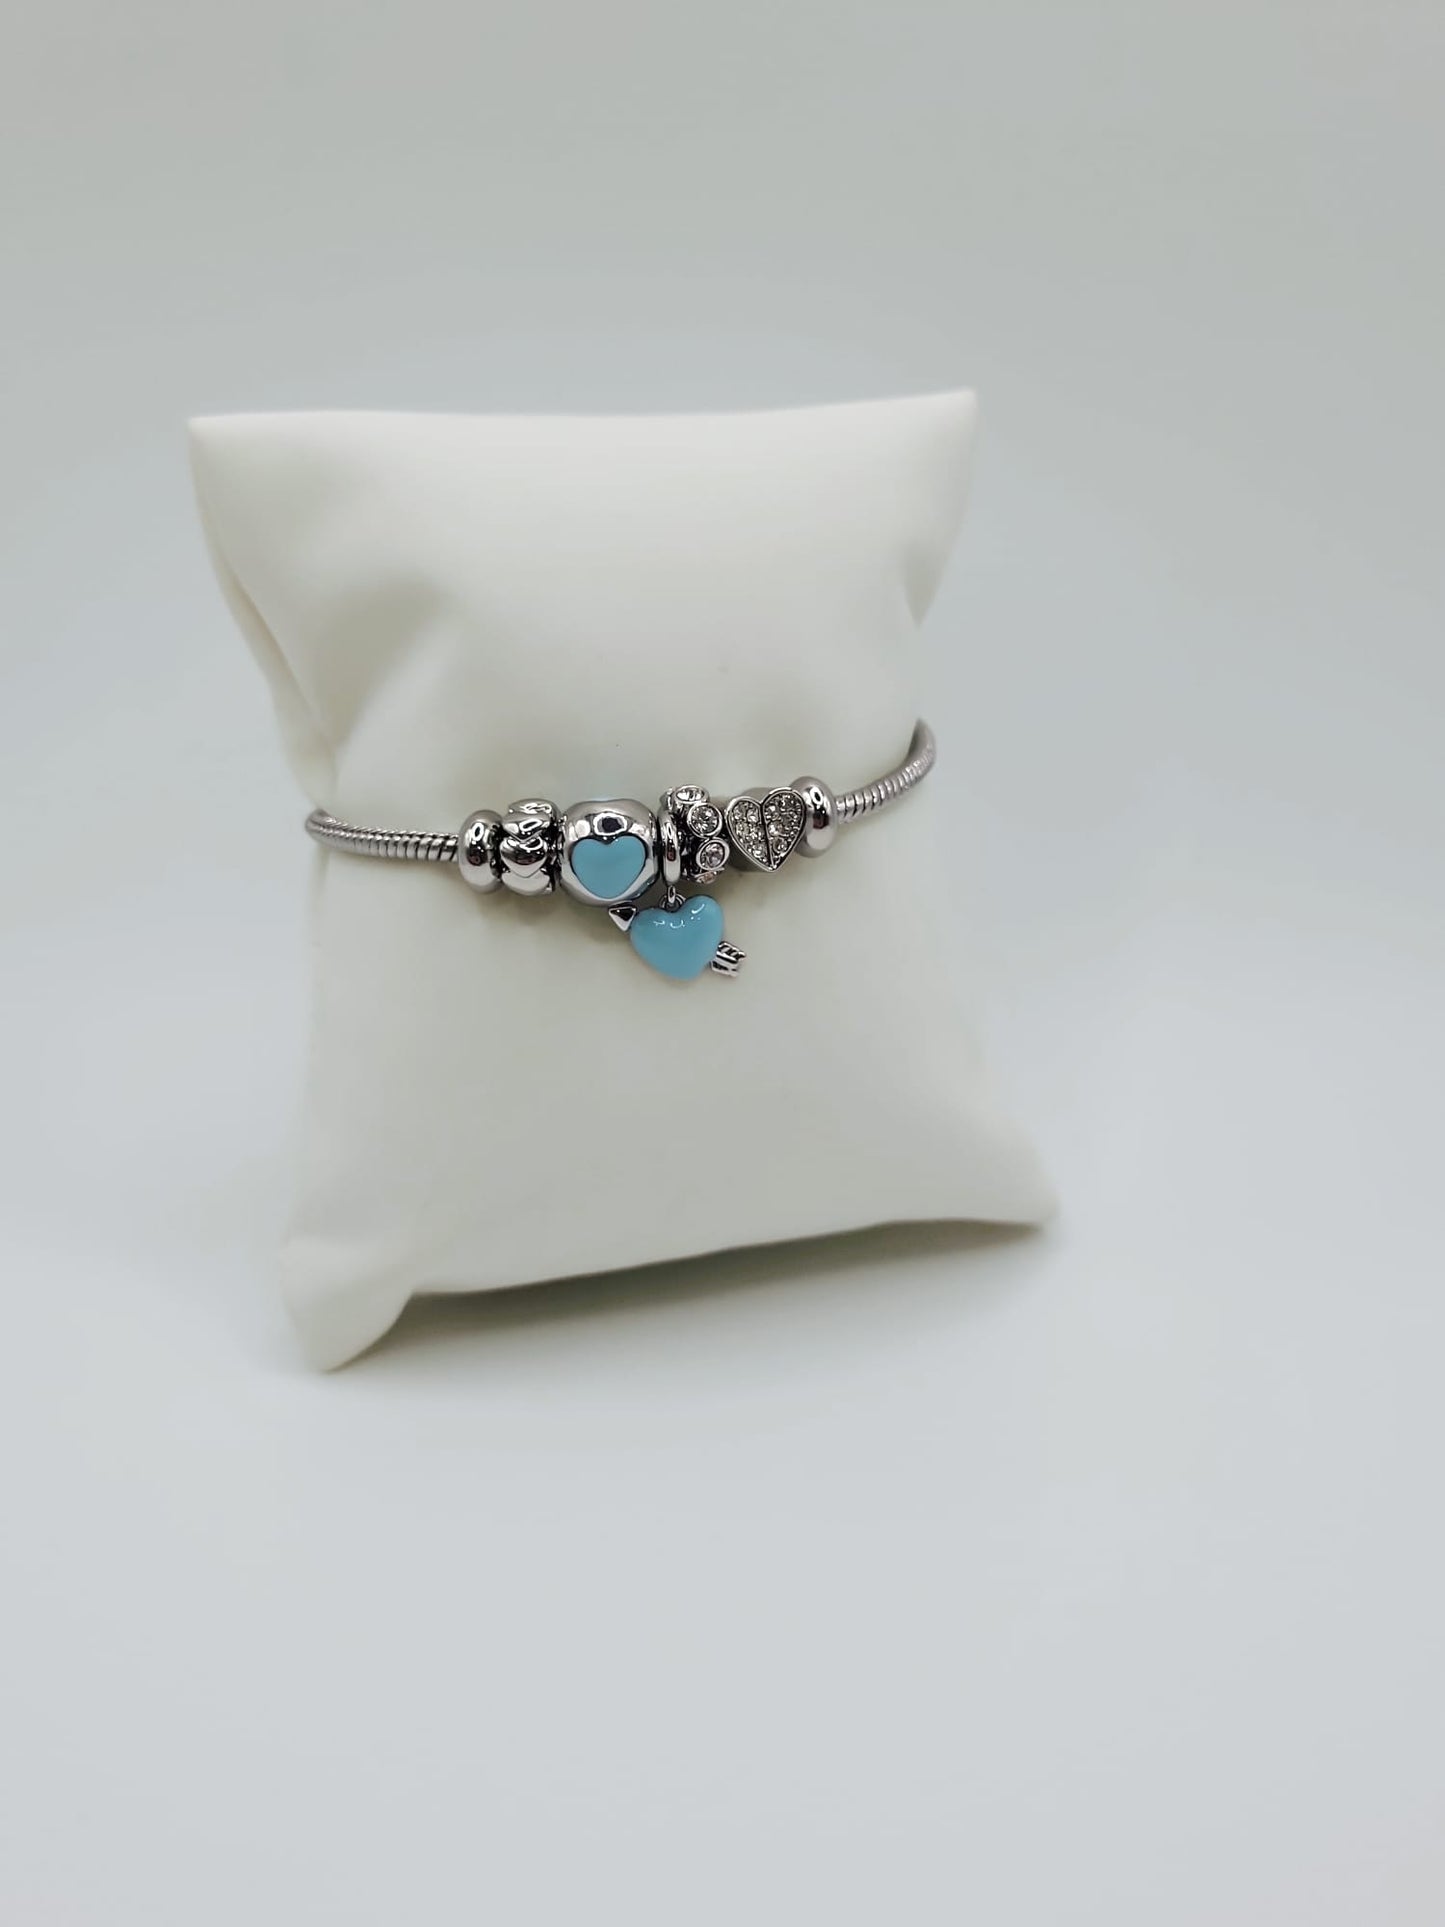 Bracelet with Charms #2